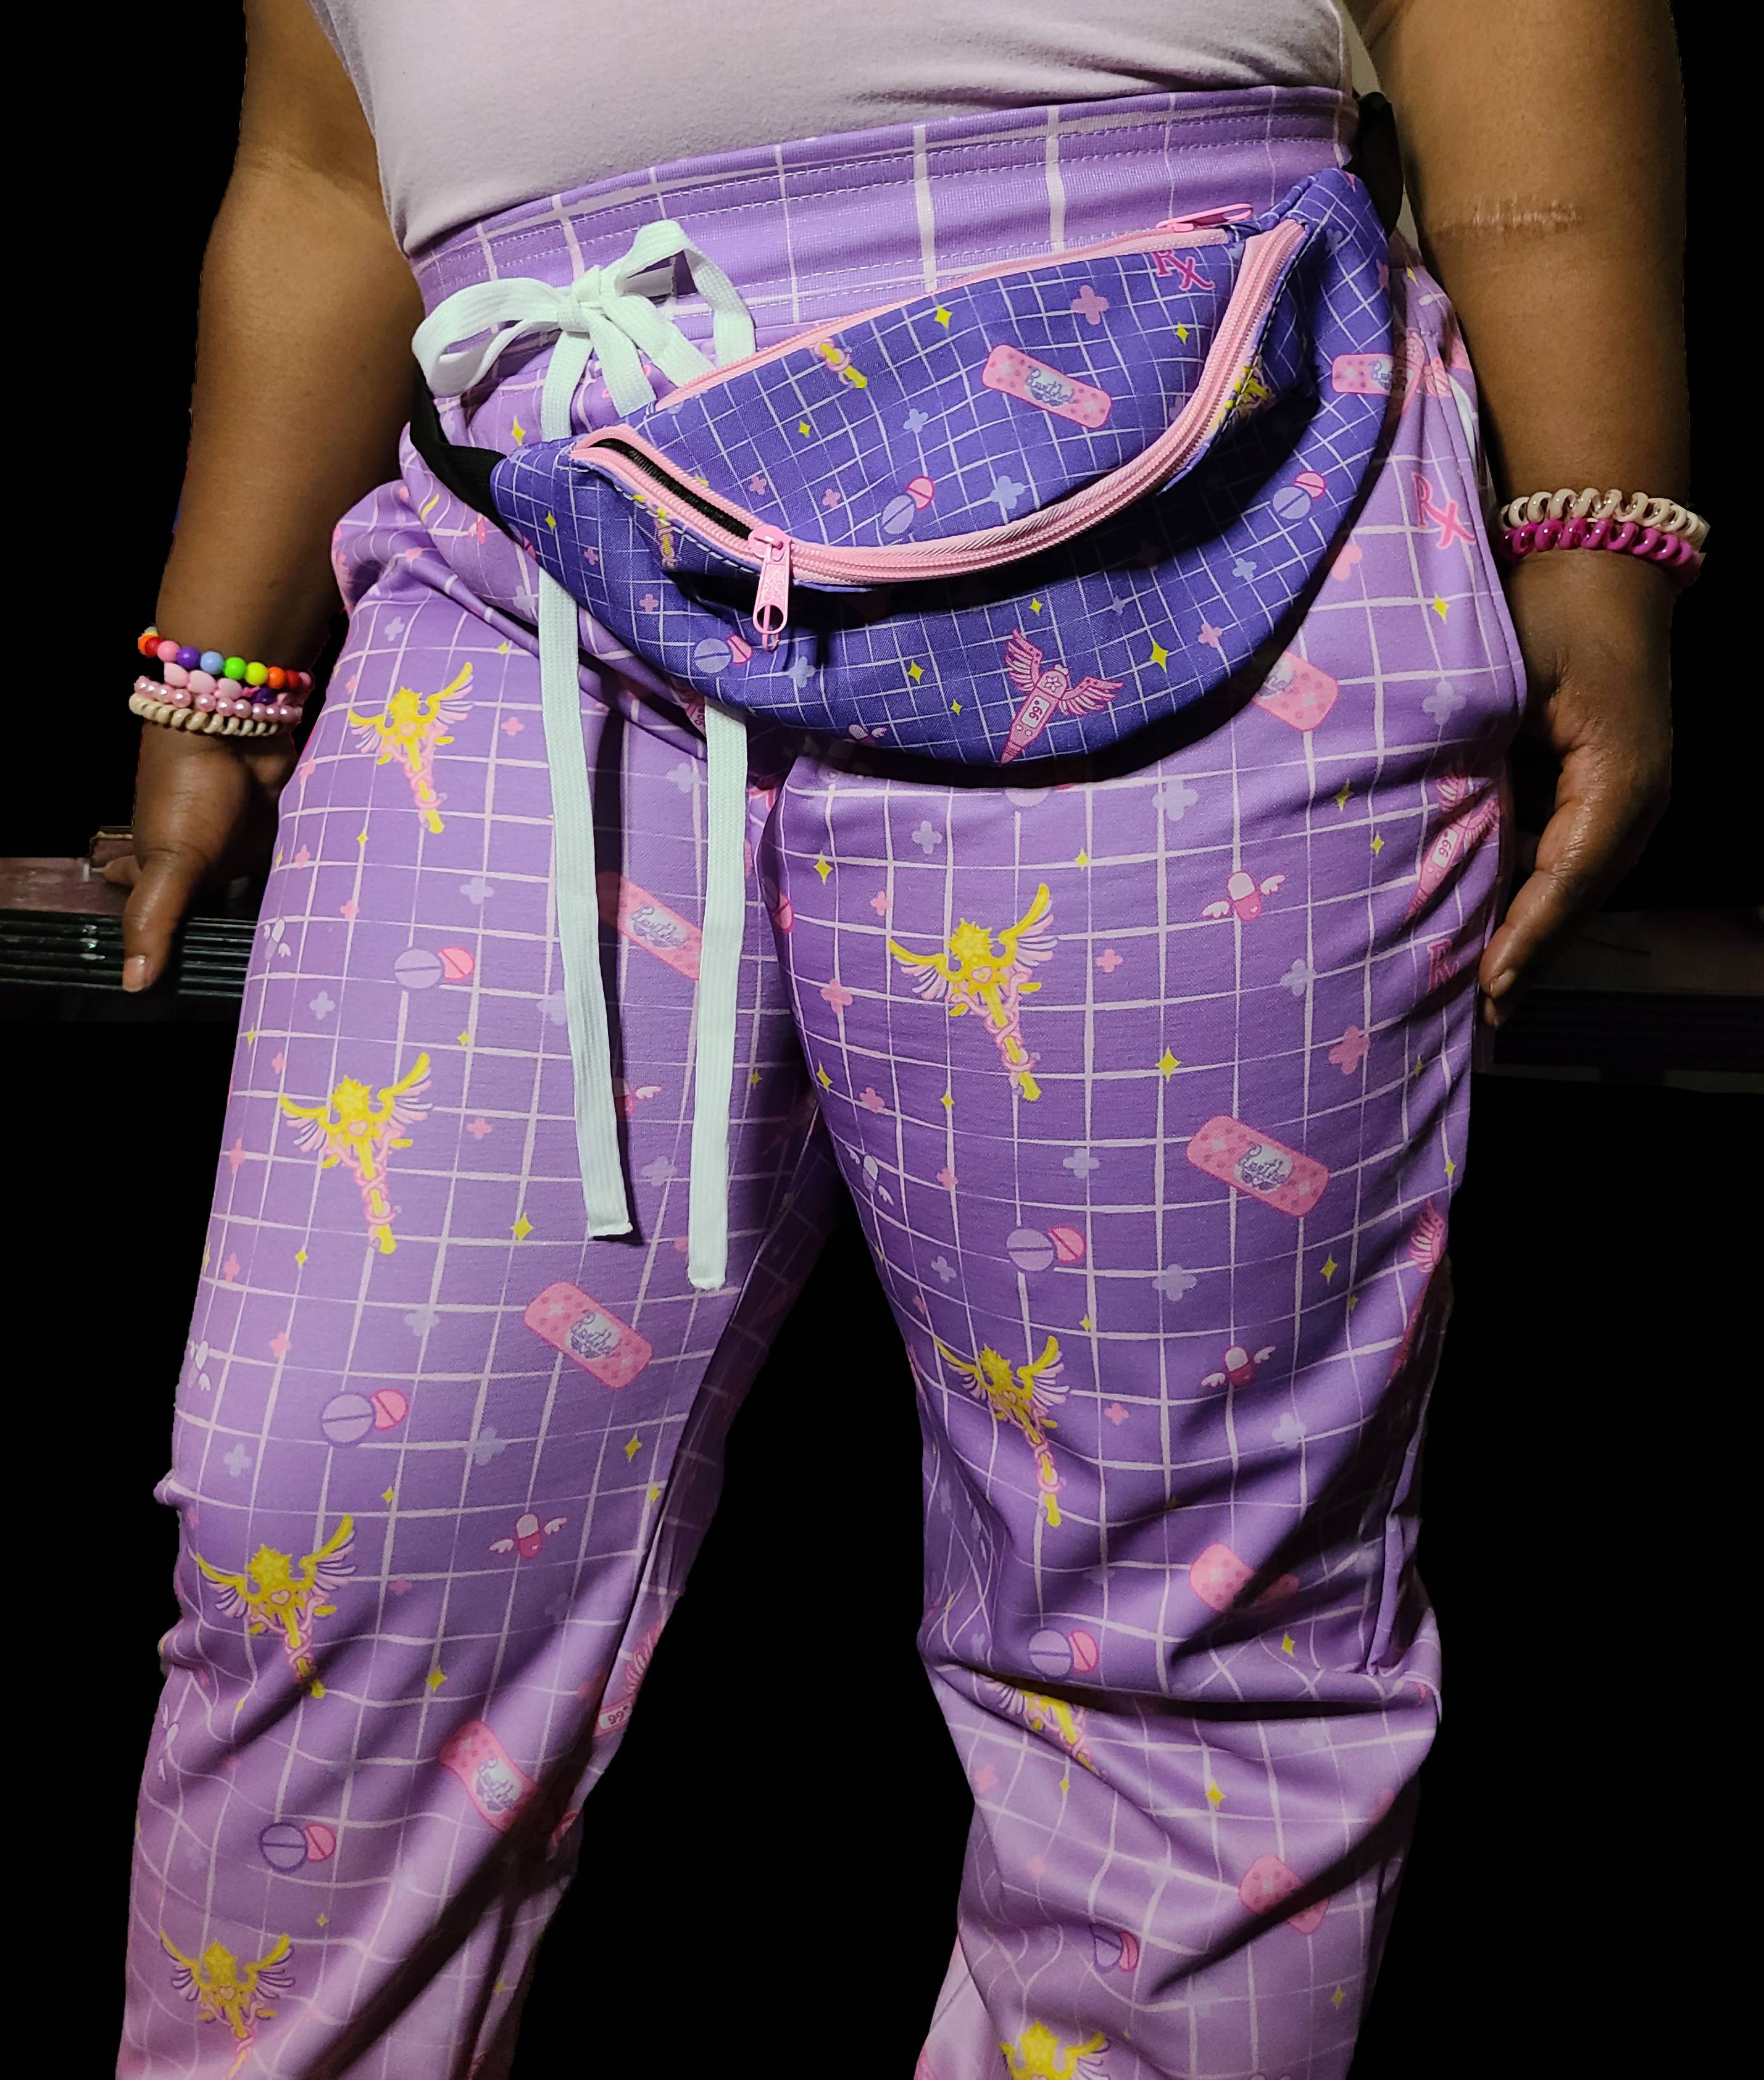 Magical Girl First Aid Sweatpants in Lavender - Lolita Collective